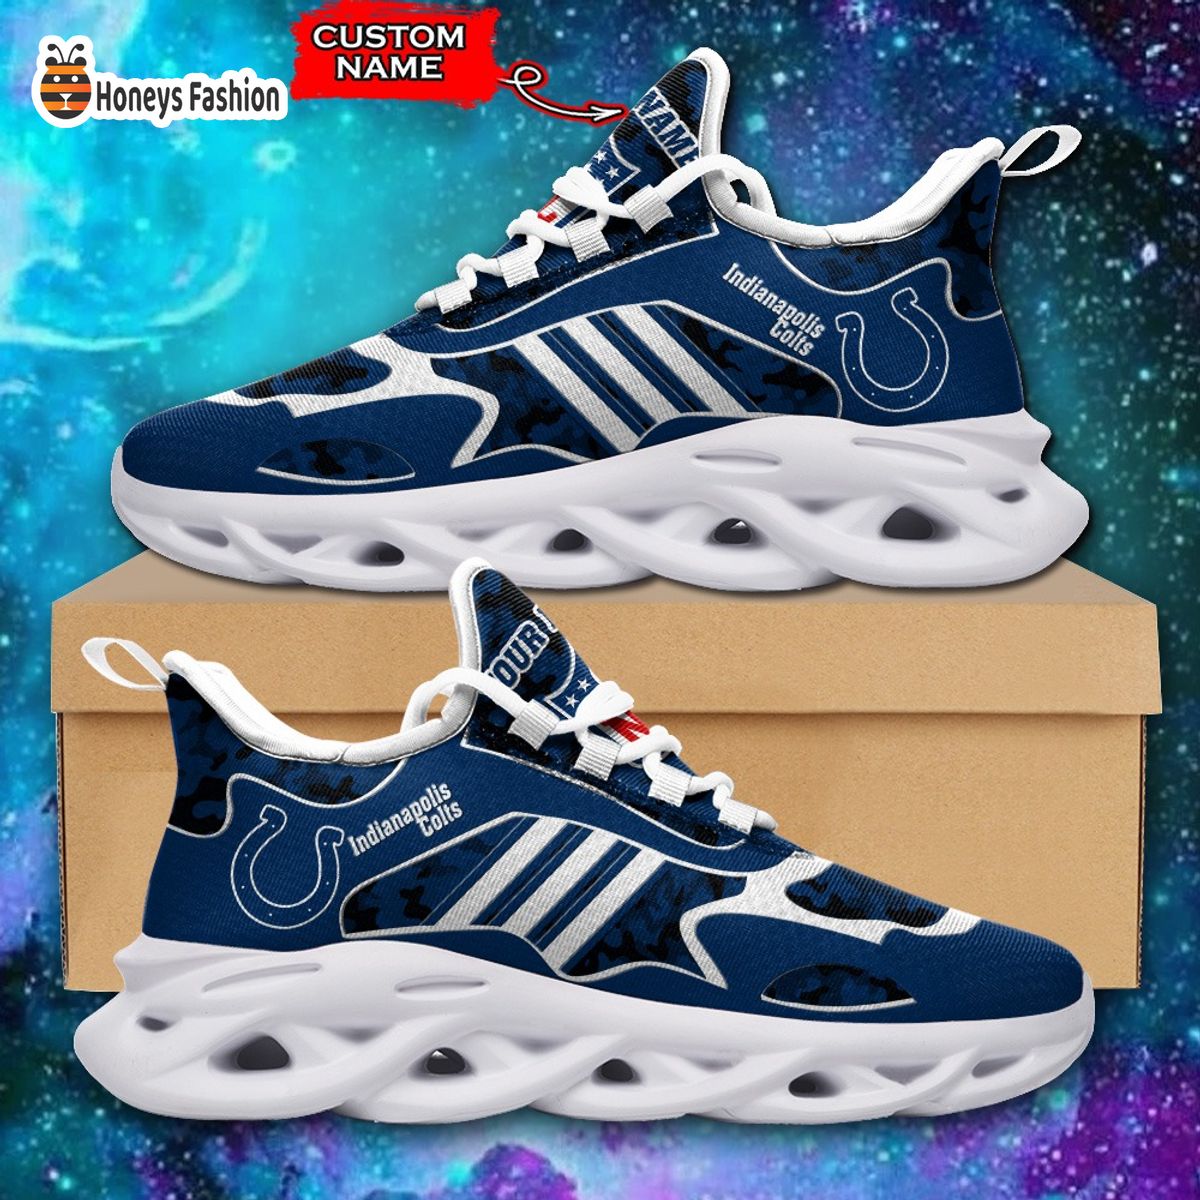 Indianapolis Colts NFL Adidas Personalized Max Soul Shoes